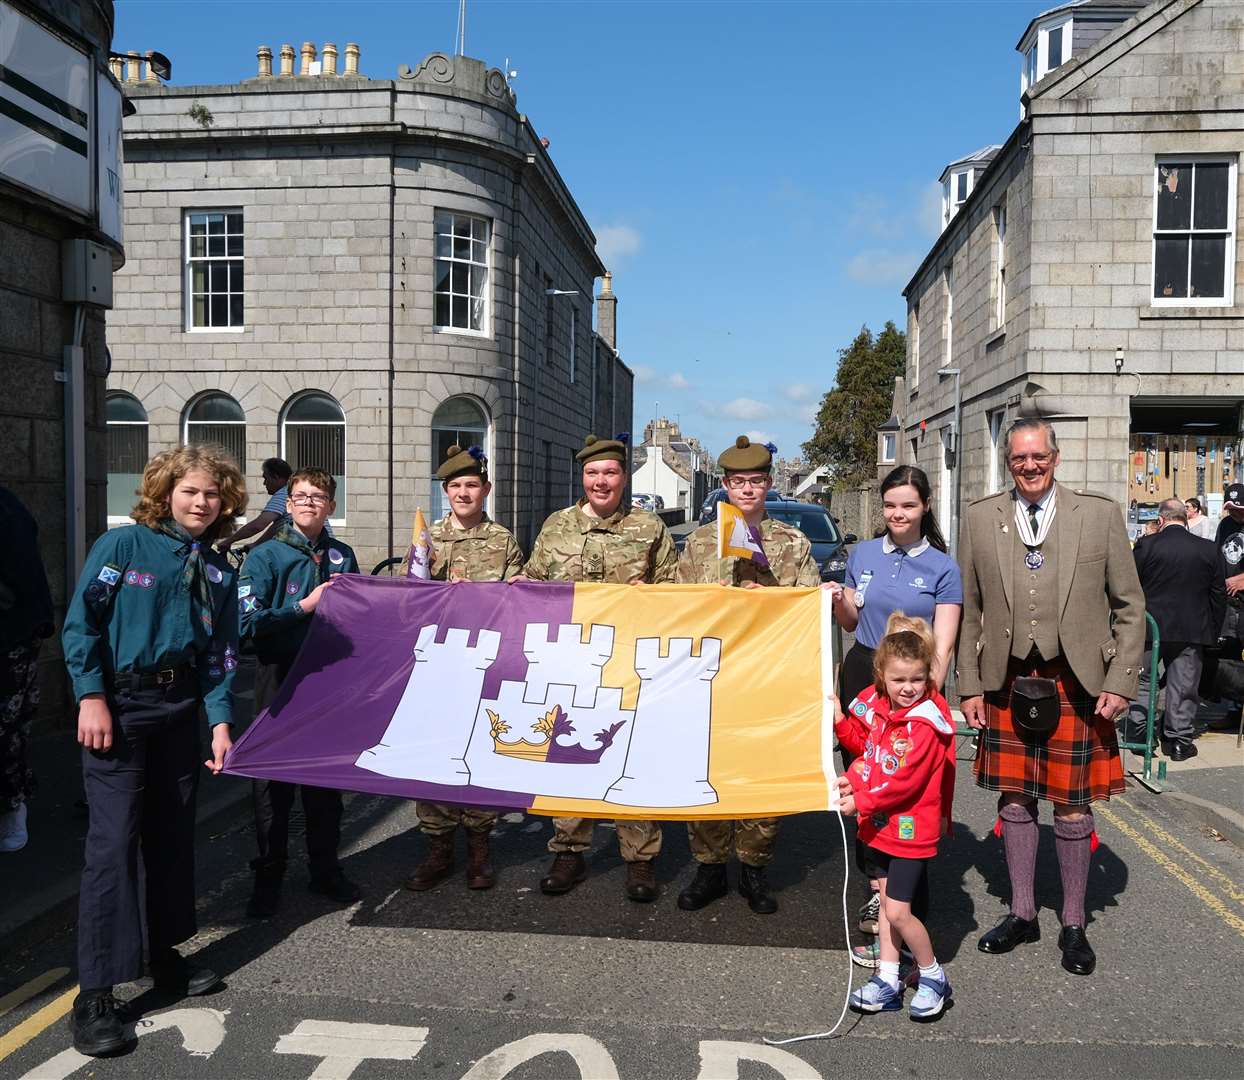 Young people from the Huntly Scouts, Huntly Guides, Huntly Rainbows and Huntly ACF Cadets showing their support...Picture: Richard Brown